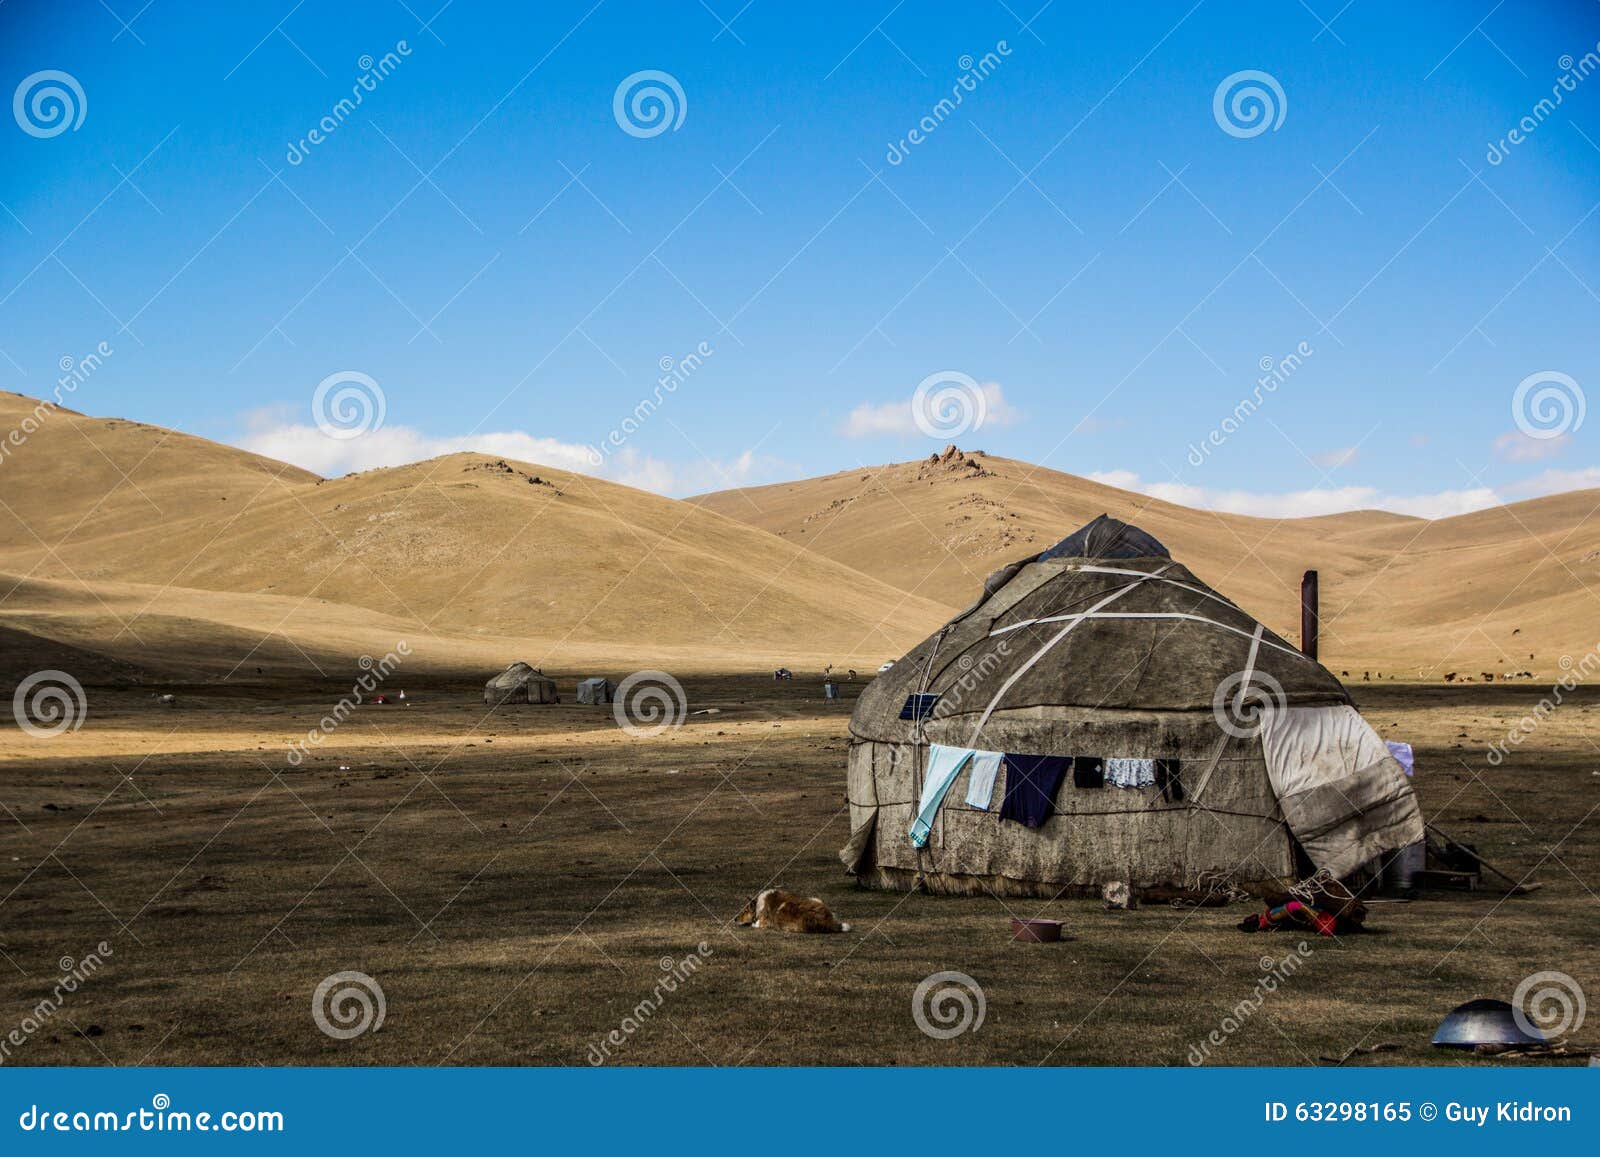 traditional yurt of central asia tribes